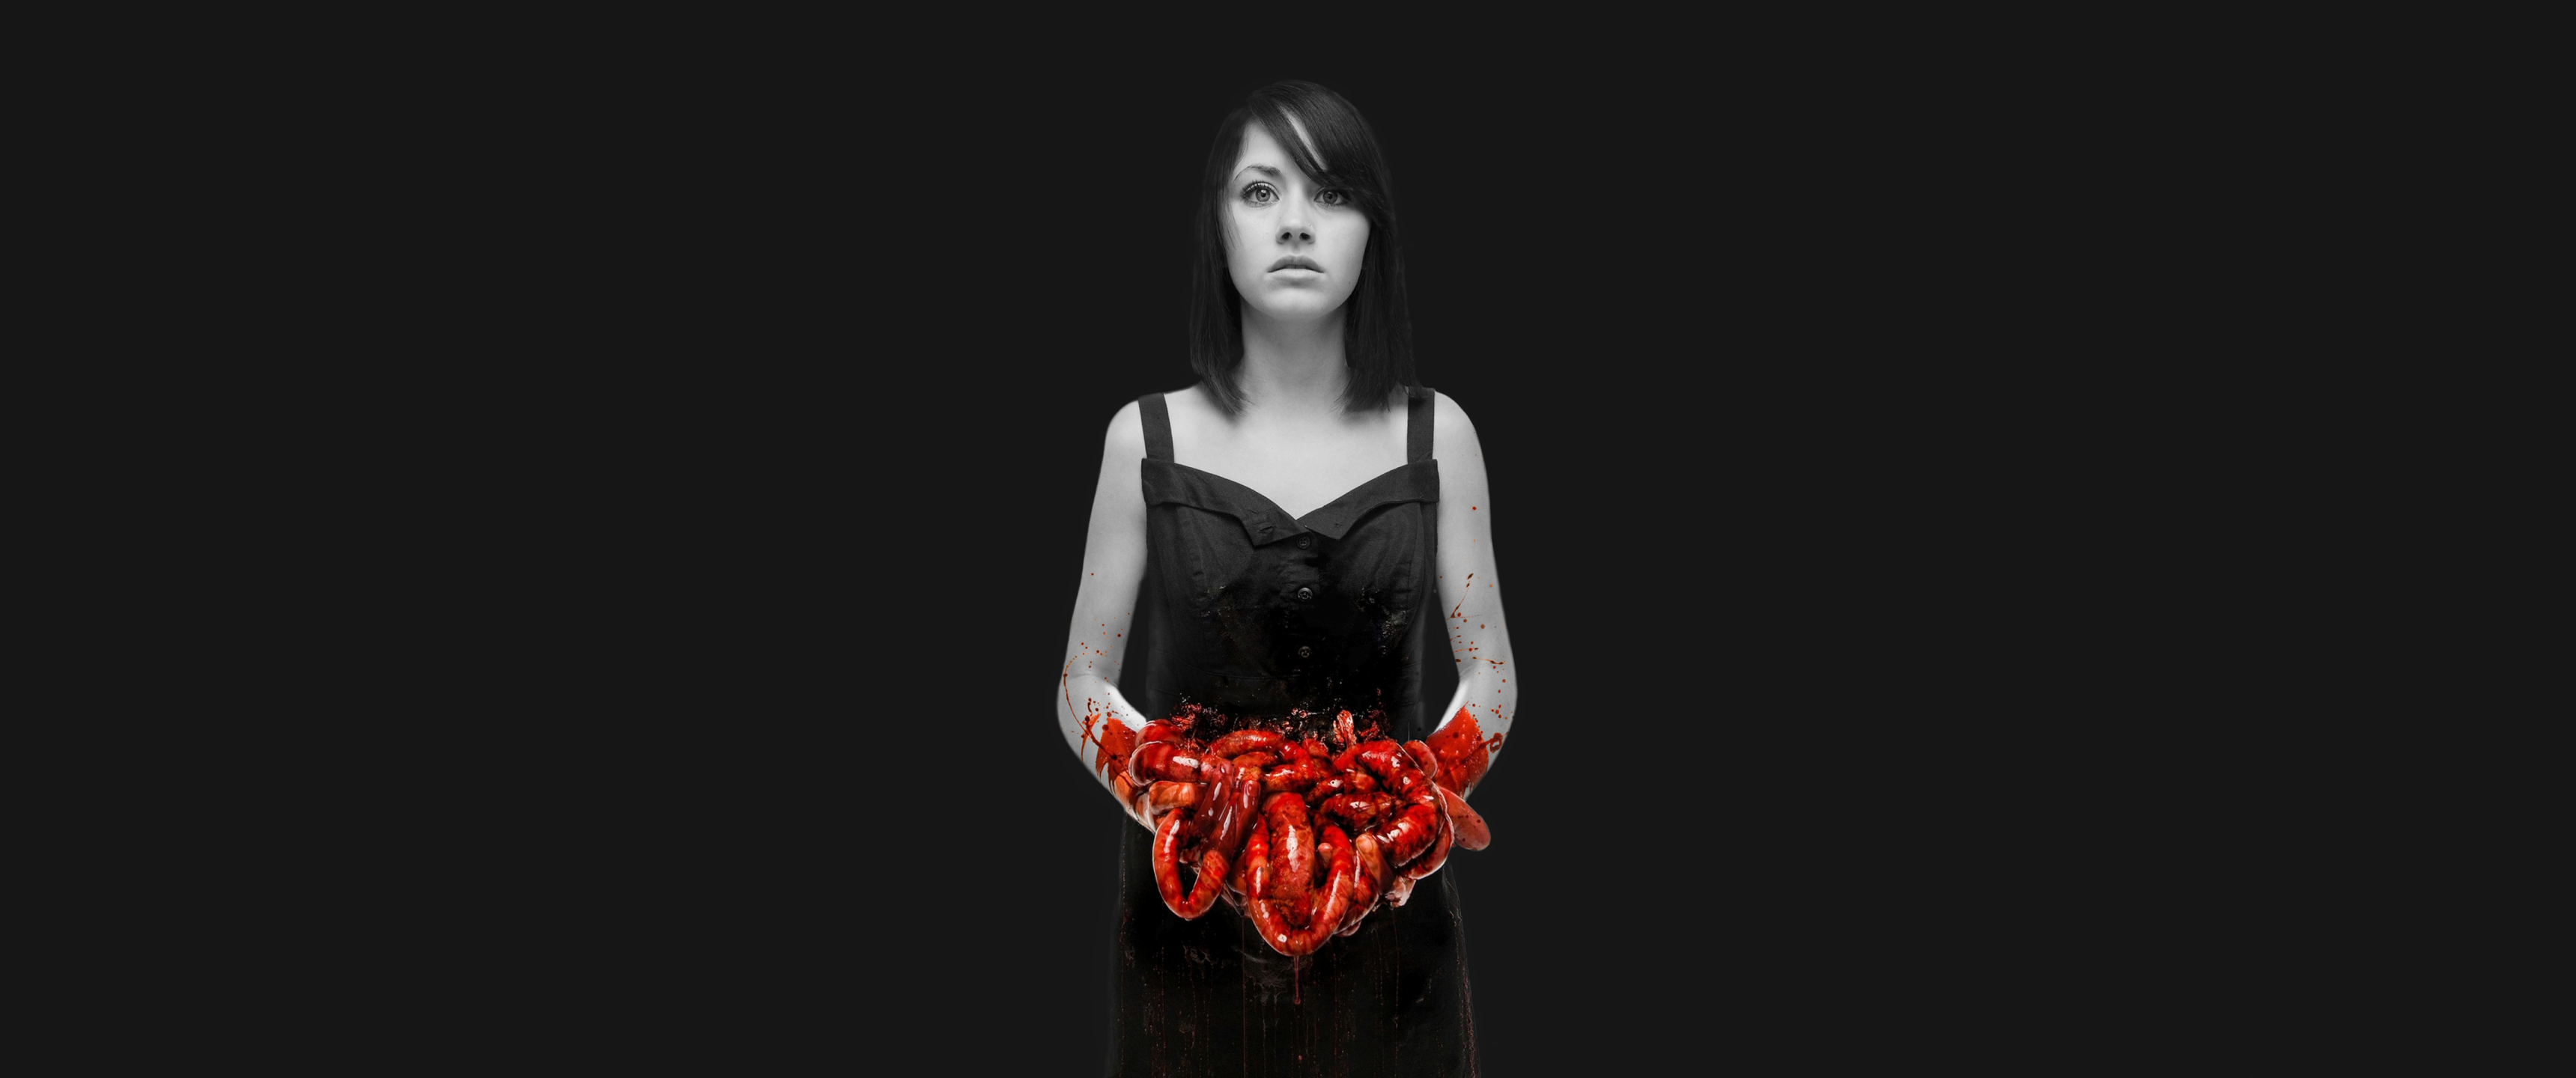 People 3440x1440 music Bring Me the Horizon album covers albums deathcore metal band hardcore gore women